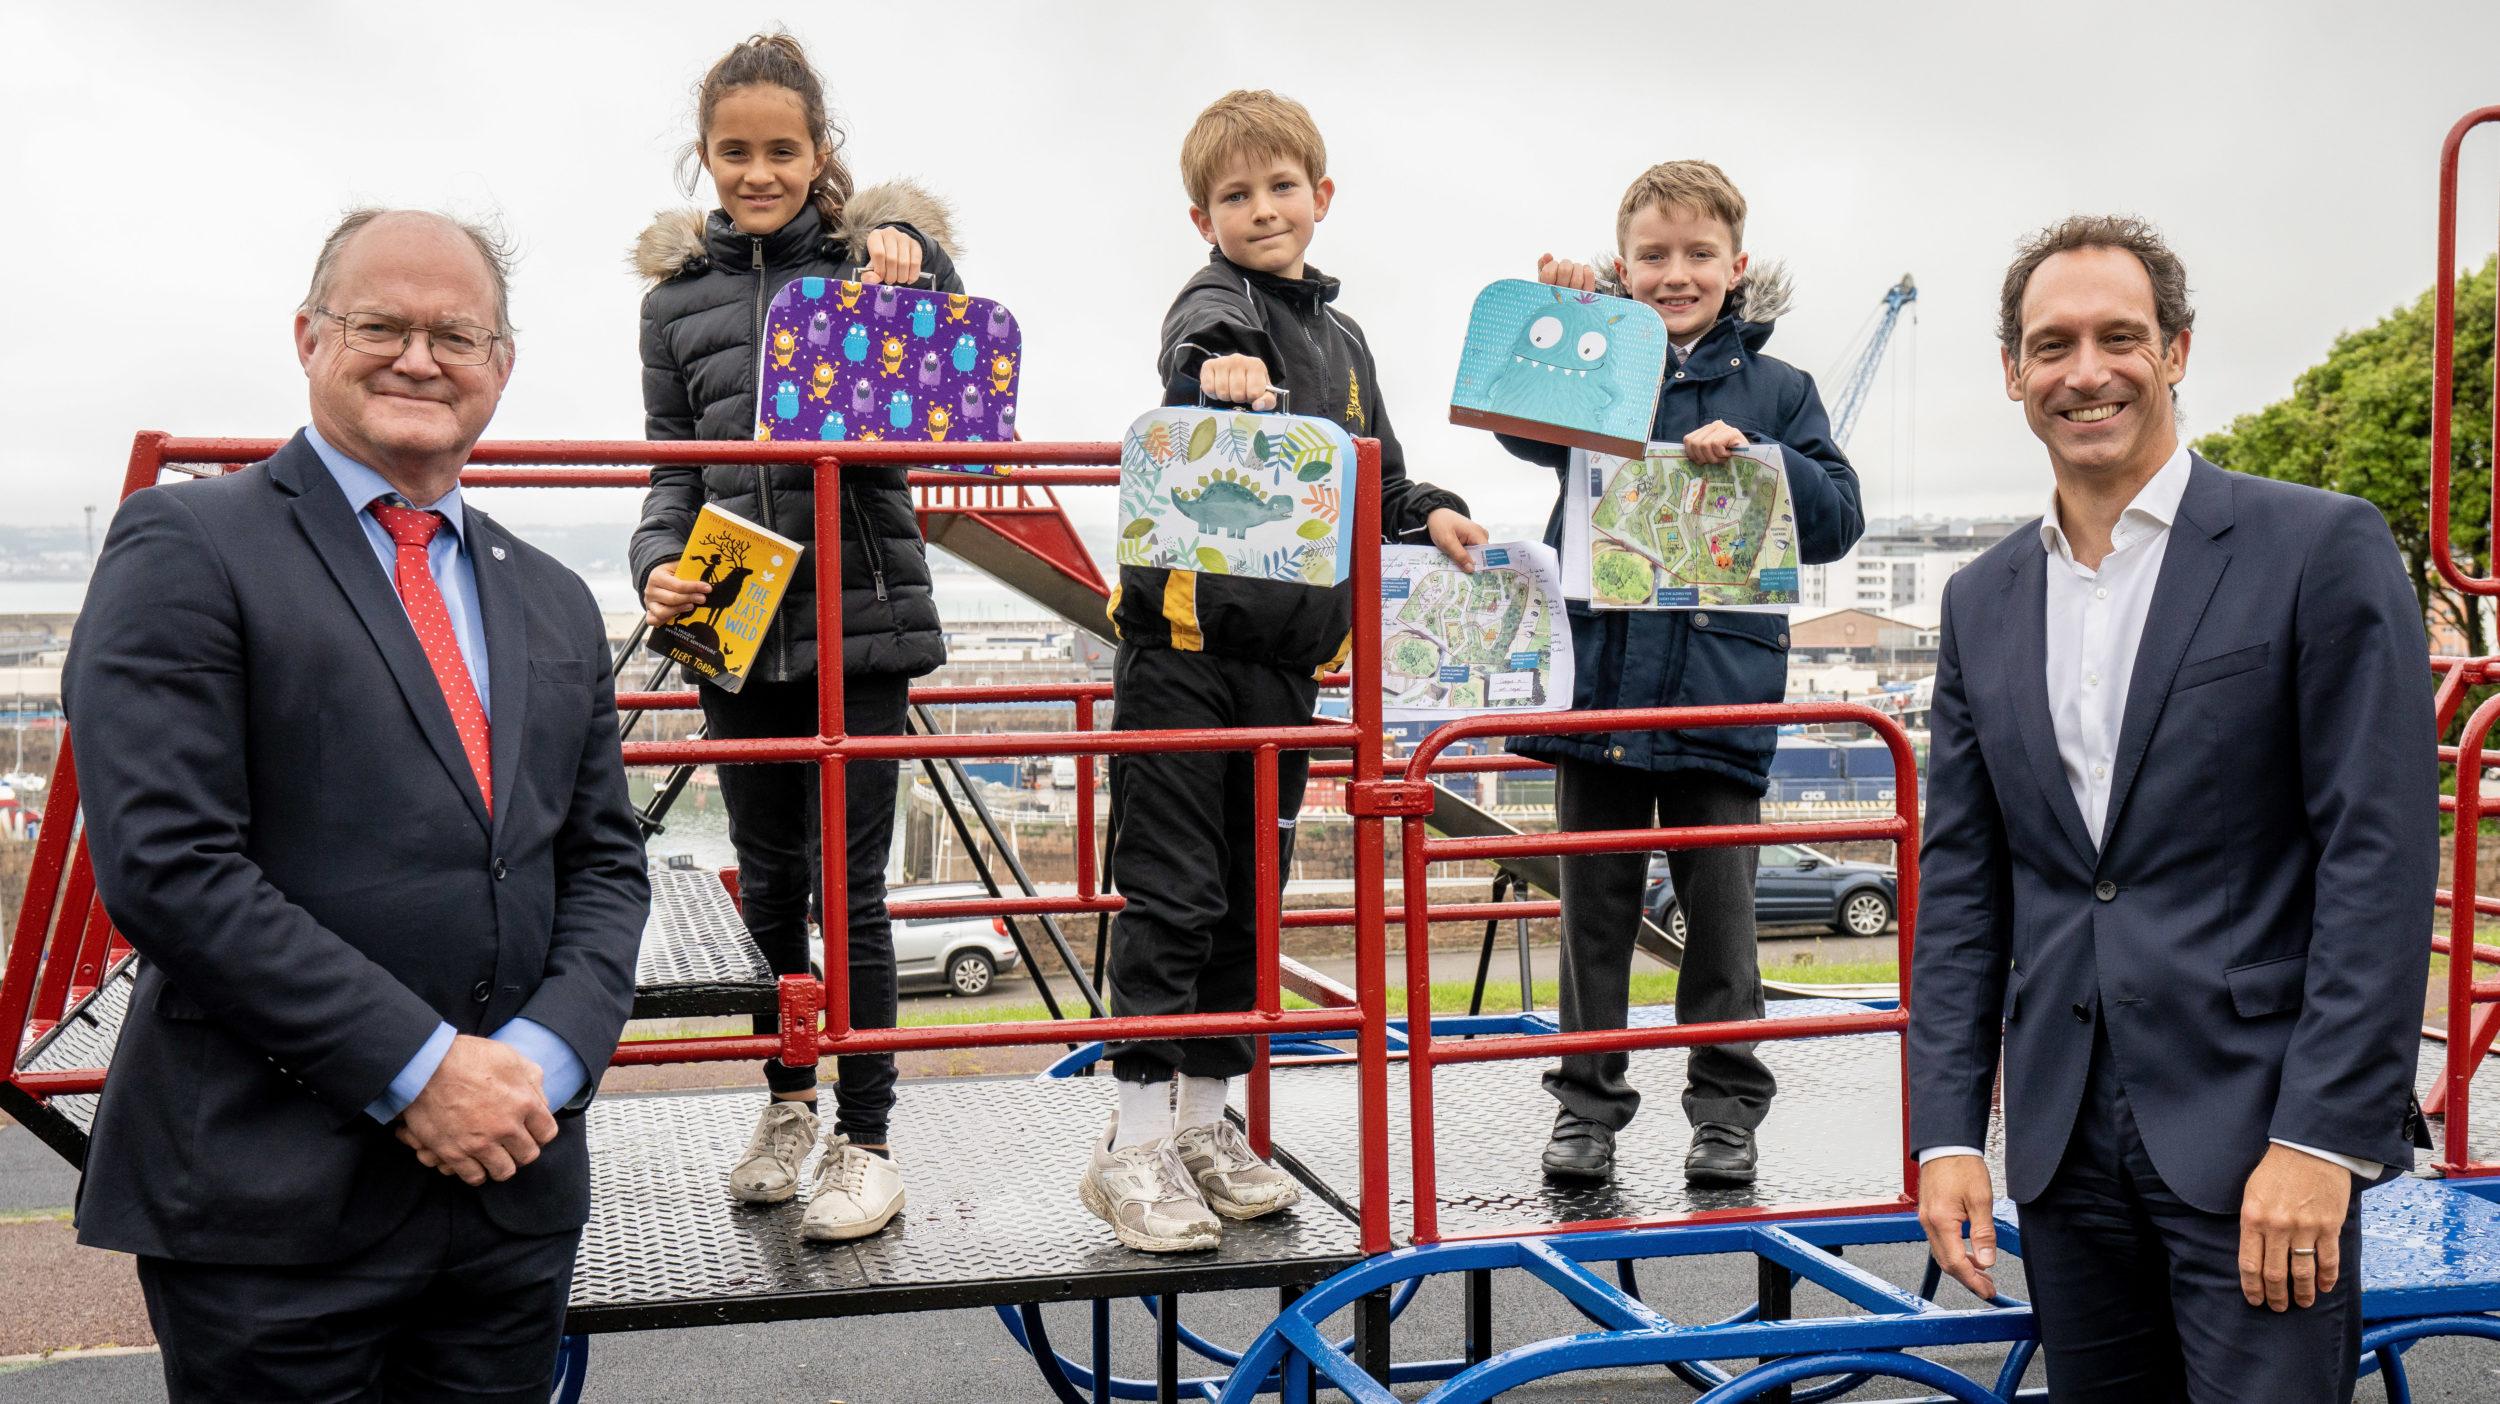 Winners of South Hill ‘Design your Park’ competition announced ...